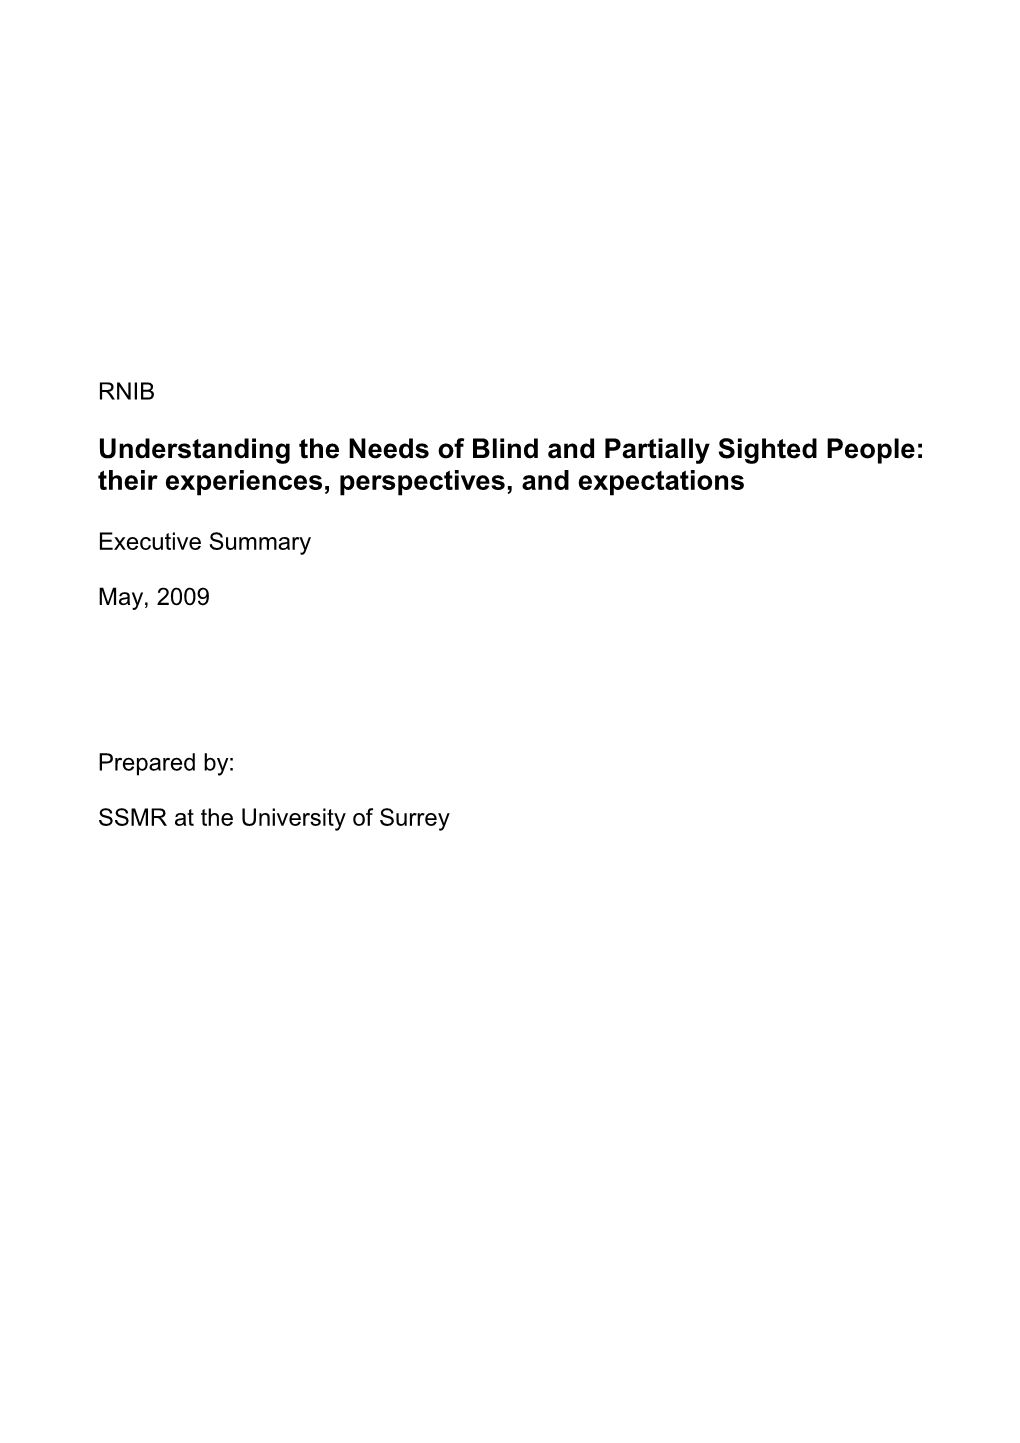 Understanding the Needs of Blind and Partially Sighted People Summary